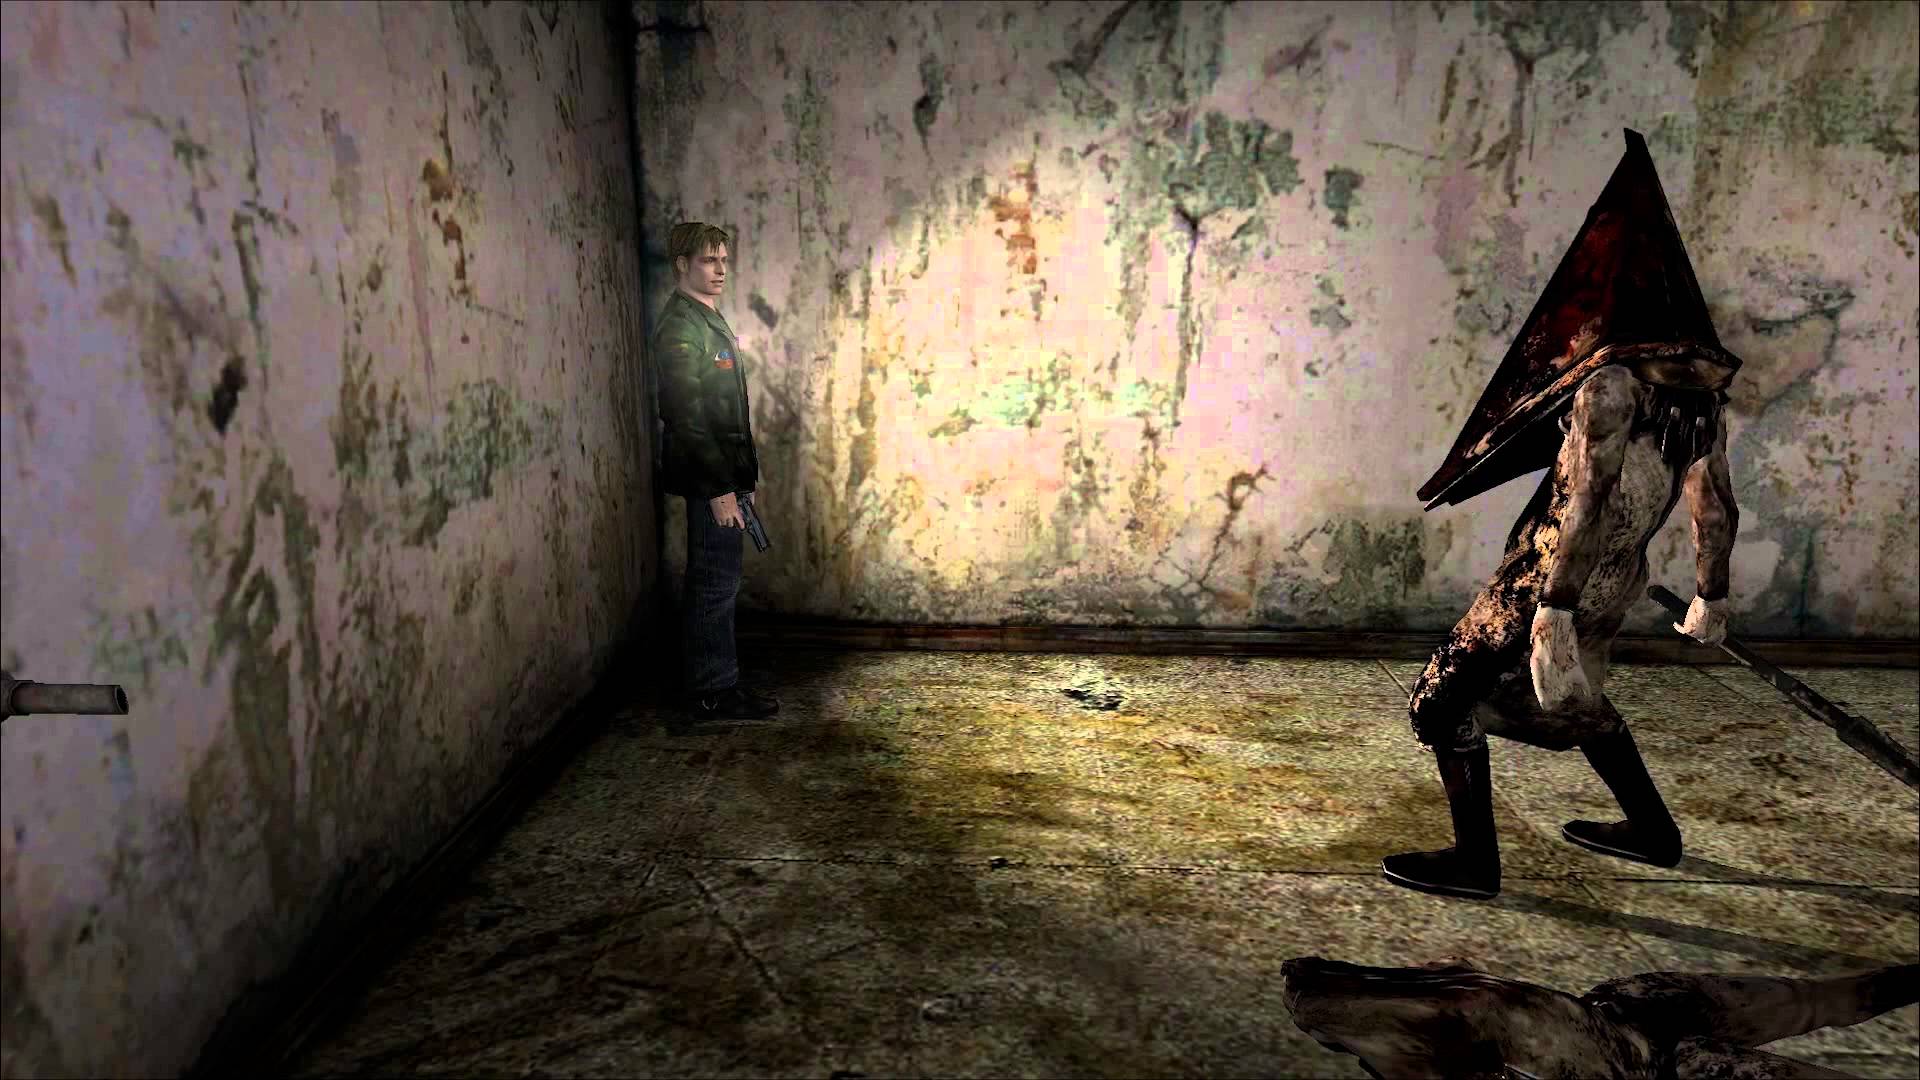 Silent Hill Ascension's Multiplayer Focus is an Interesting New